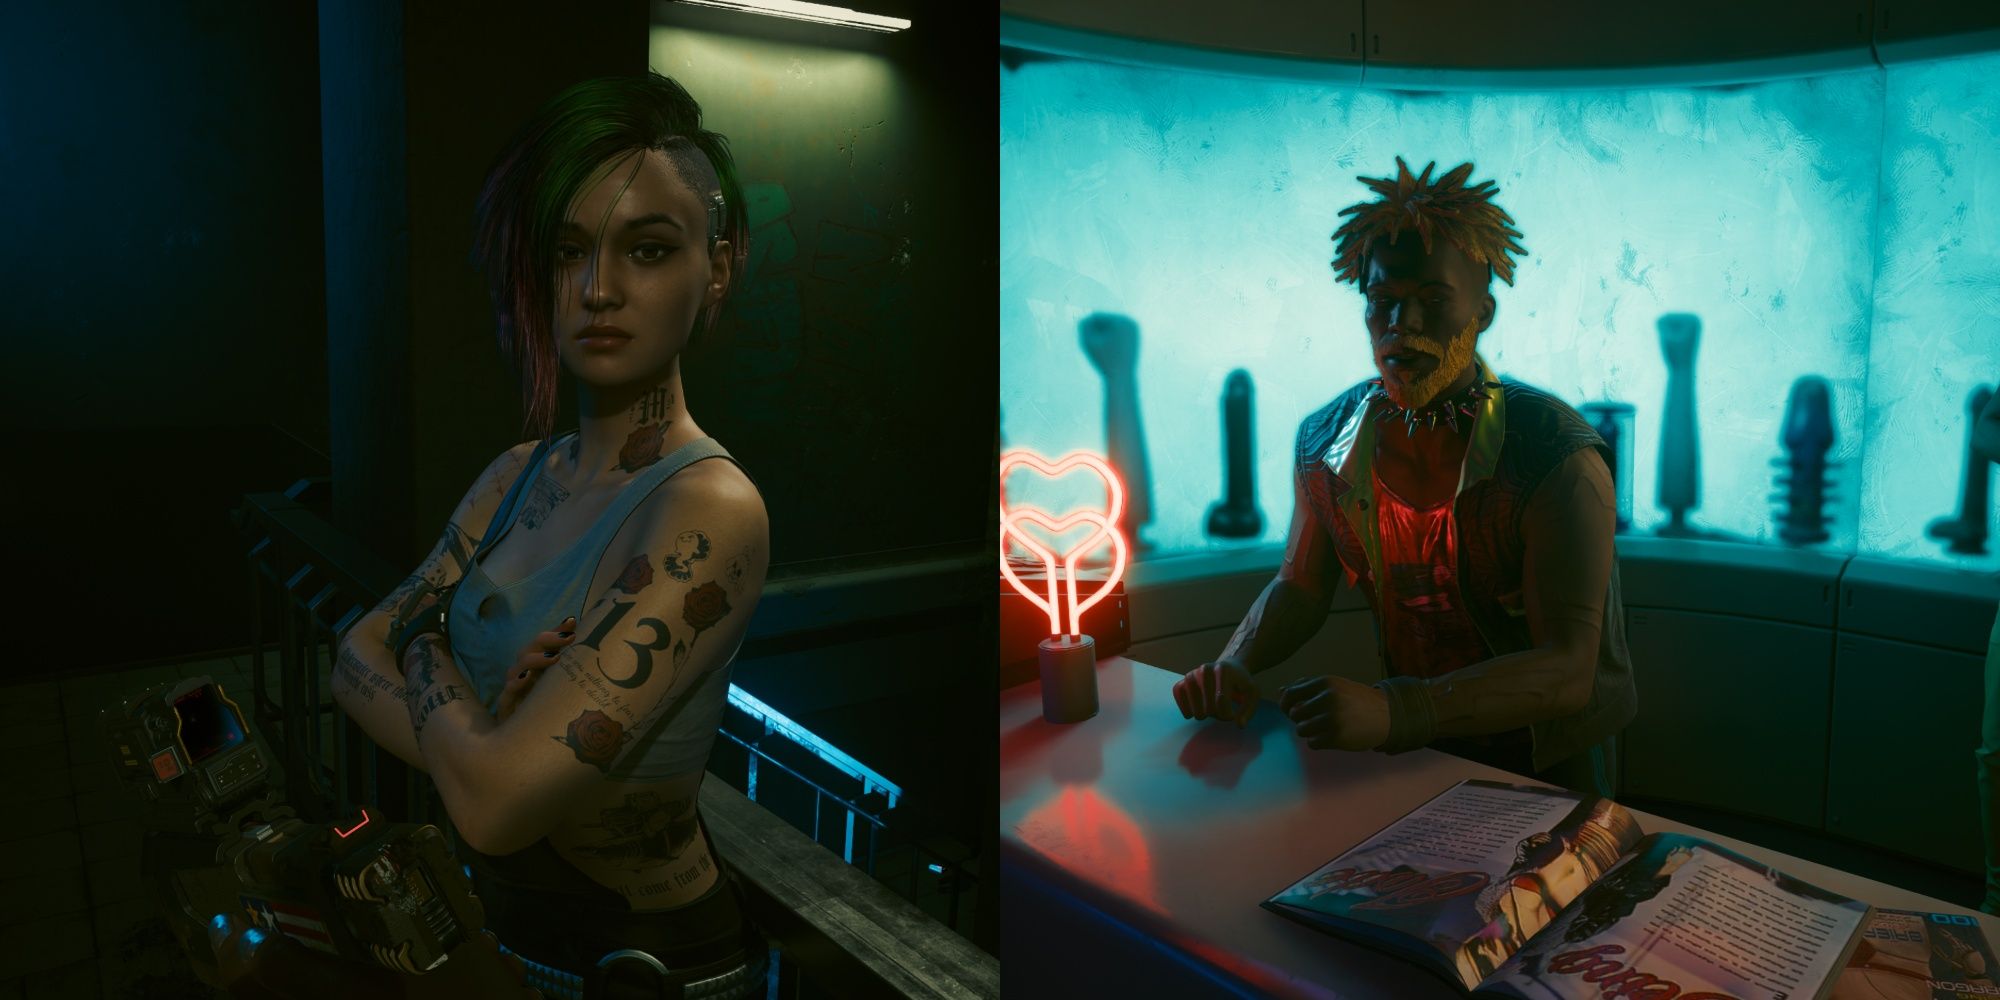 Collage image of Judy Alvarez looking upset and a sex shop vendor in Cyberpunk 2077.